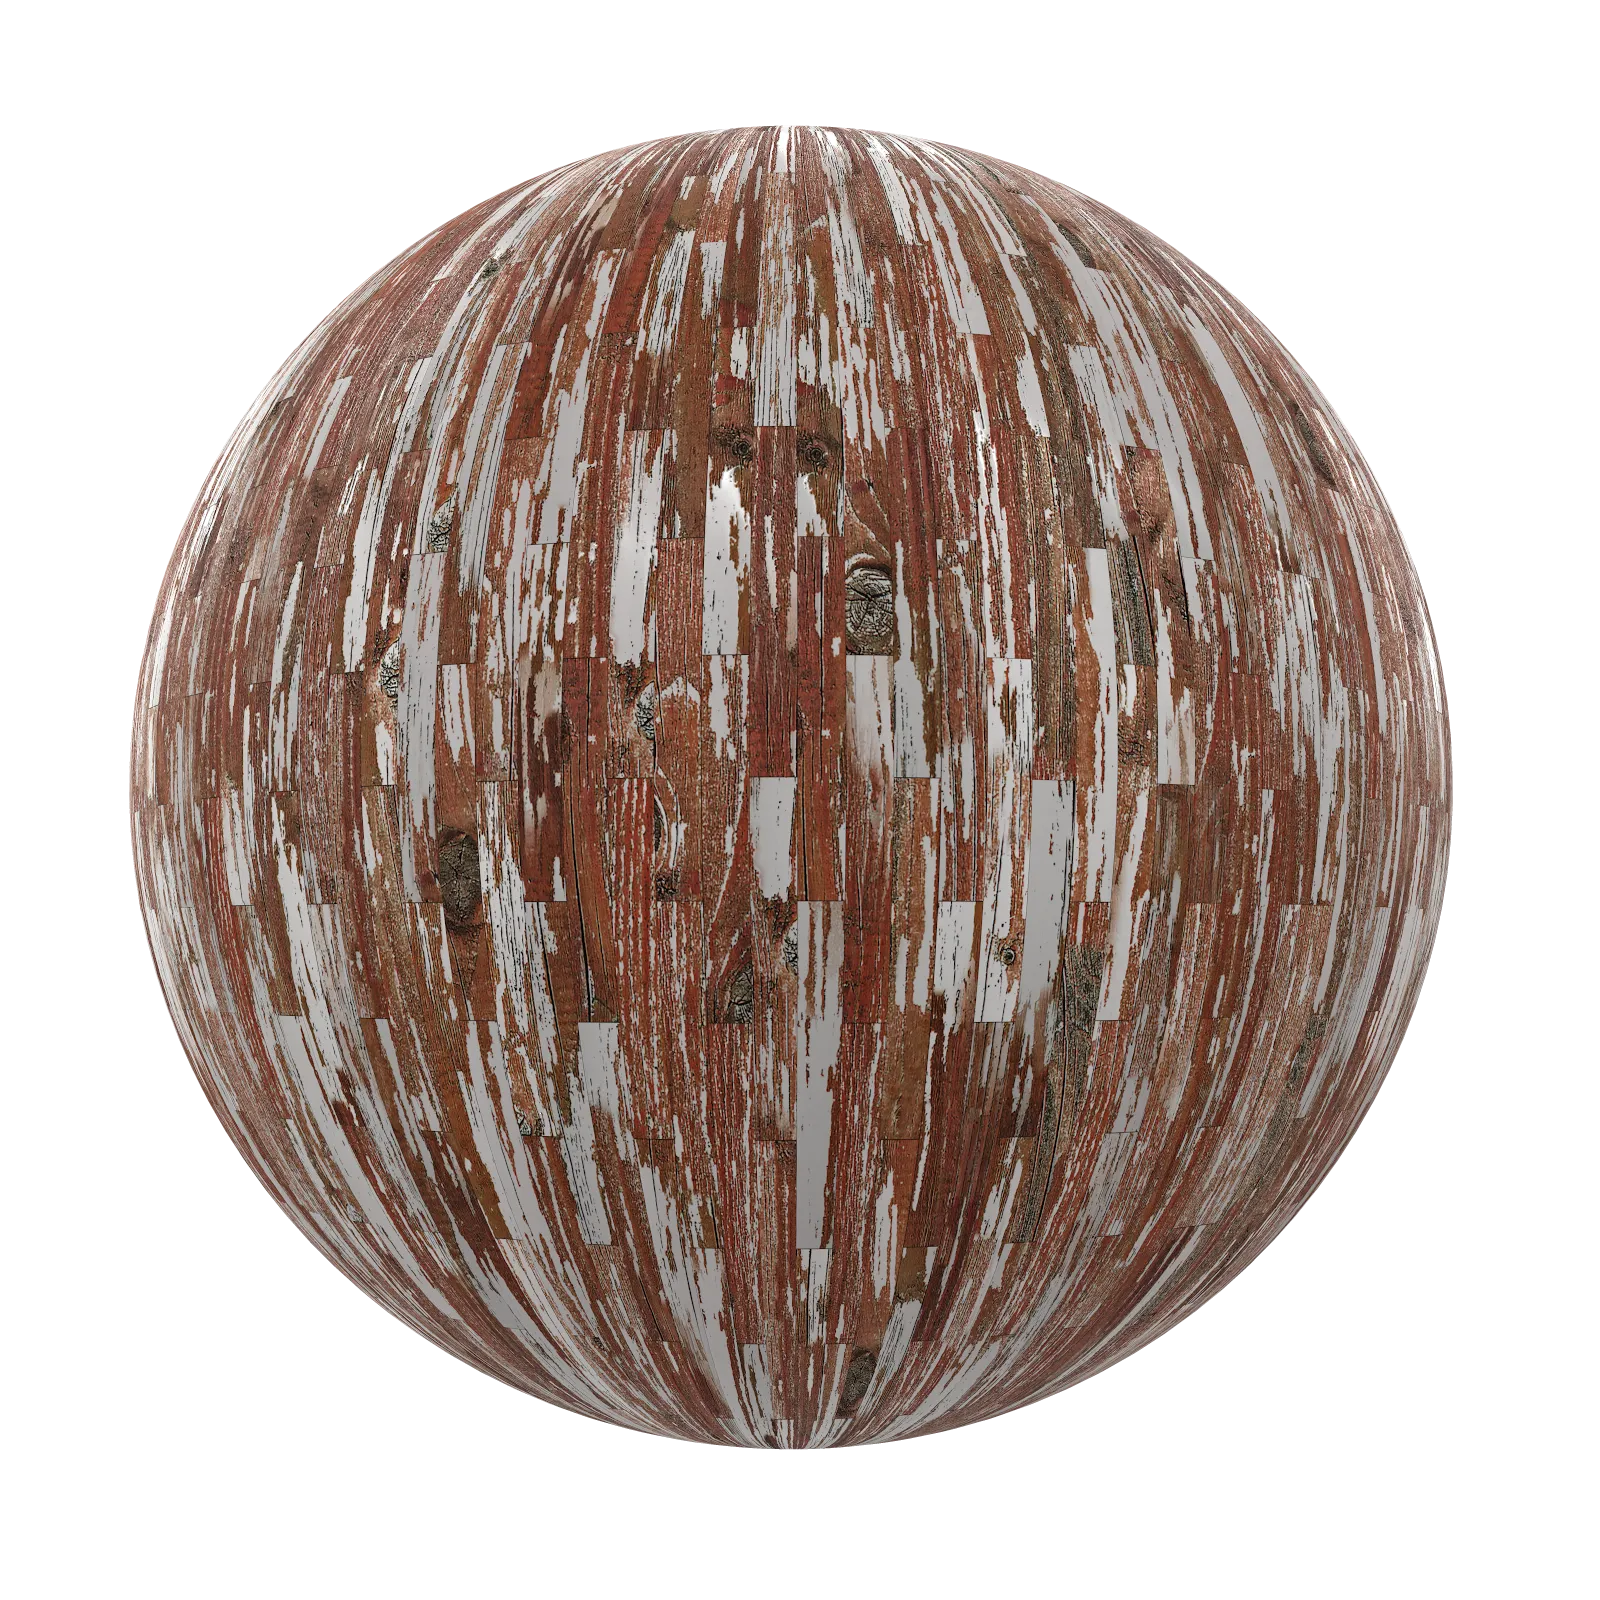 TEXTURES – WOOD – Old Wood Tiles 5